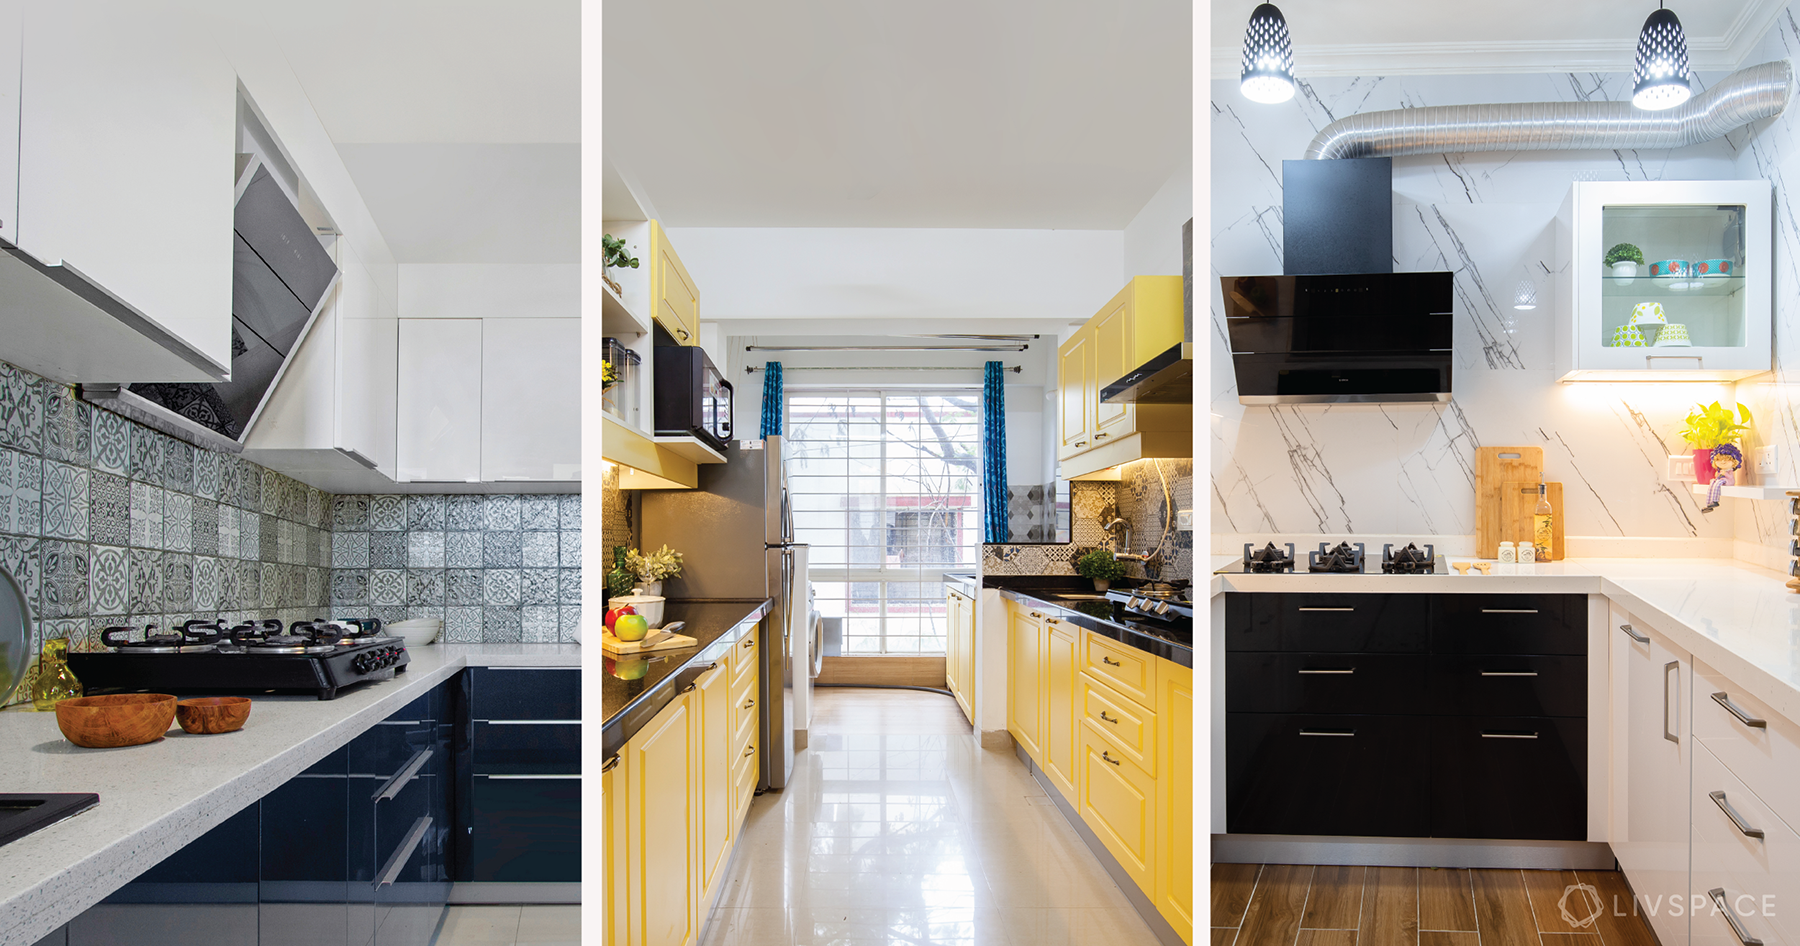 20 Small Kitchens Under 200 sq. ft. & What Makes Them Amazing